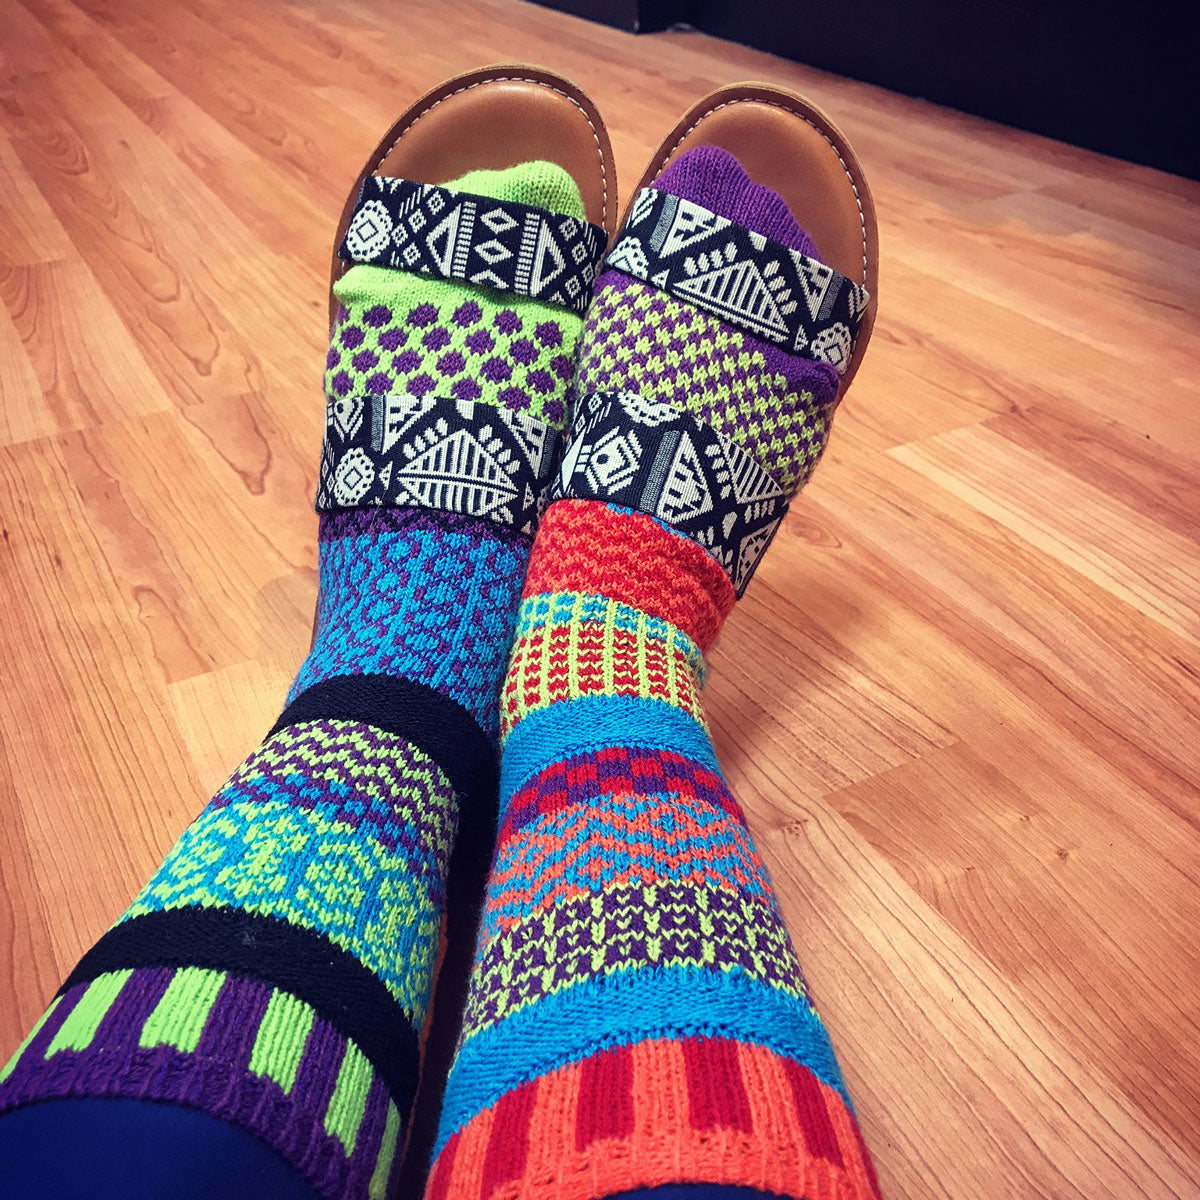 Solmate socks are colorful mismatched socks made in the USA from recycled cotton, as shown here in a geometric knit pattern in a rainbow of bright colors.